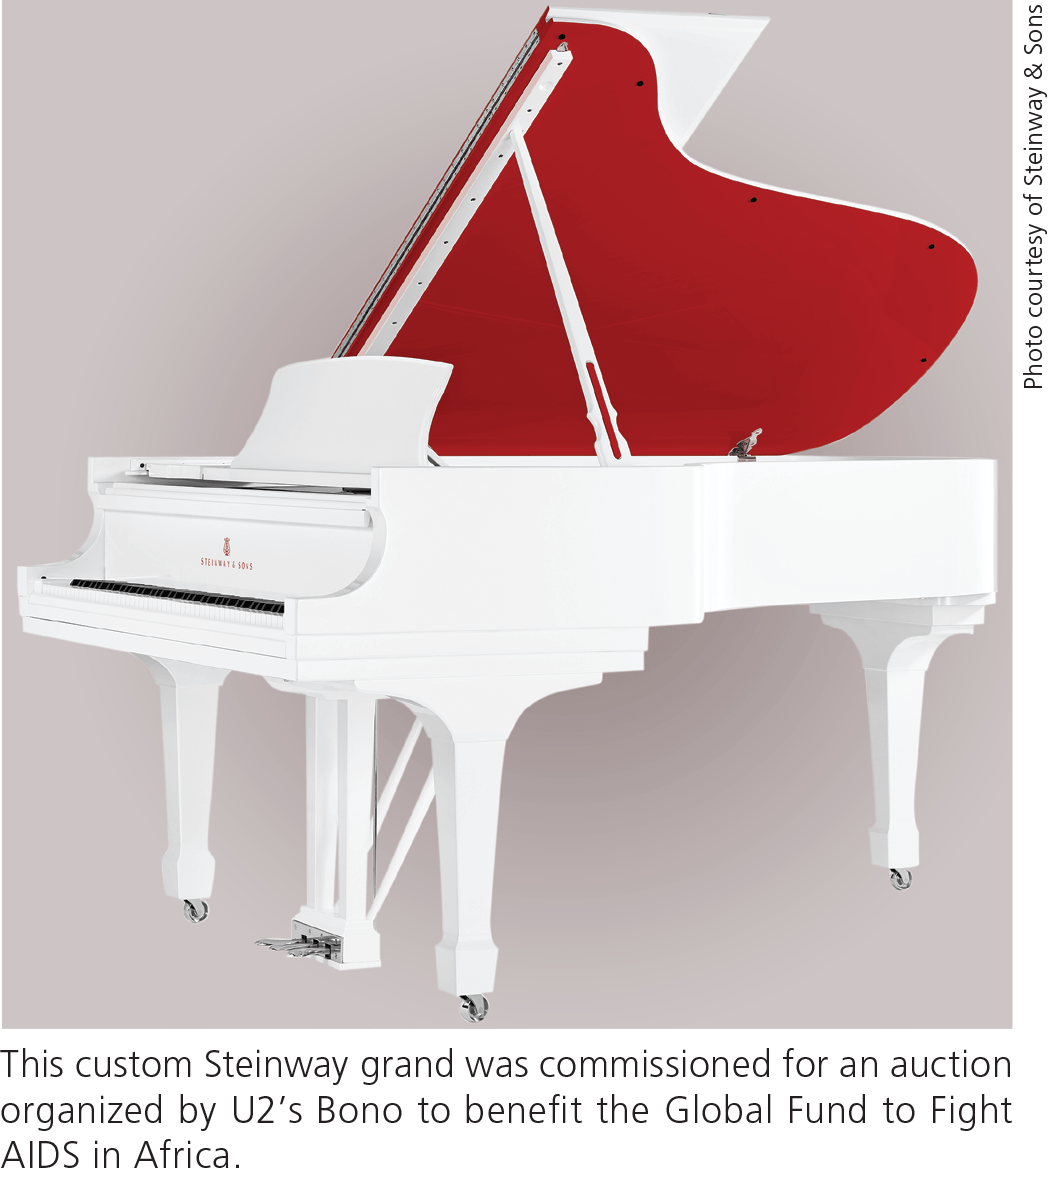 This custom Steinway grand was commissioned for an auction organized by U2’s Bono to benefit the Global Fund to Fight AIDS in Africa.